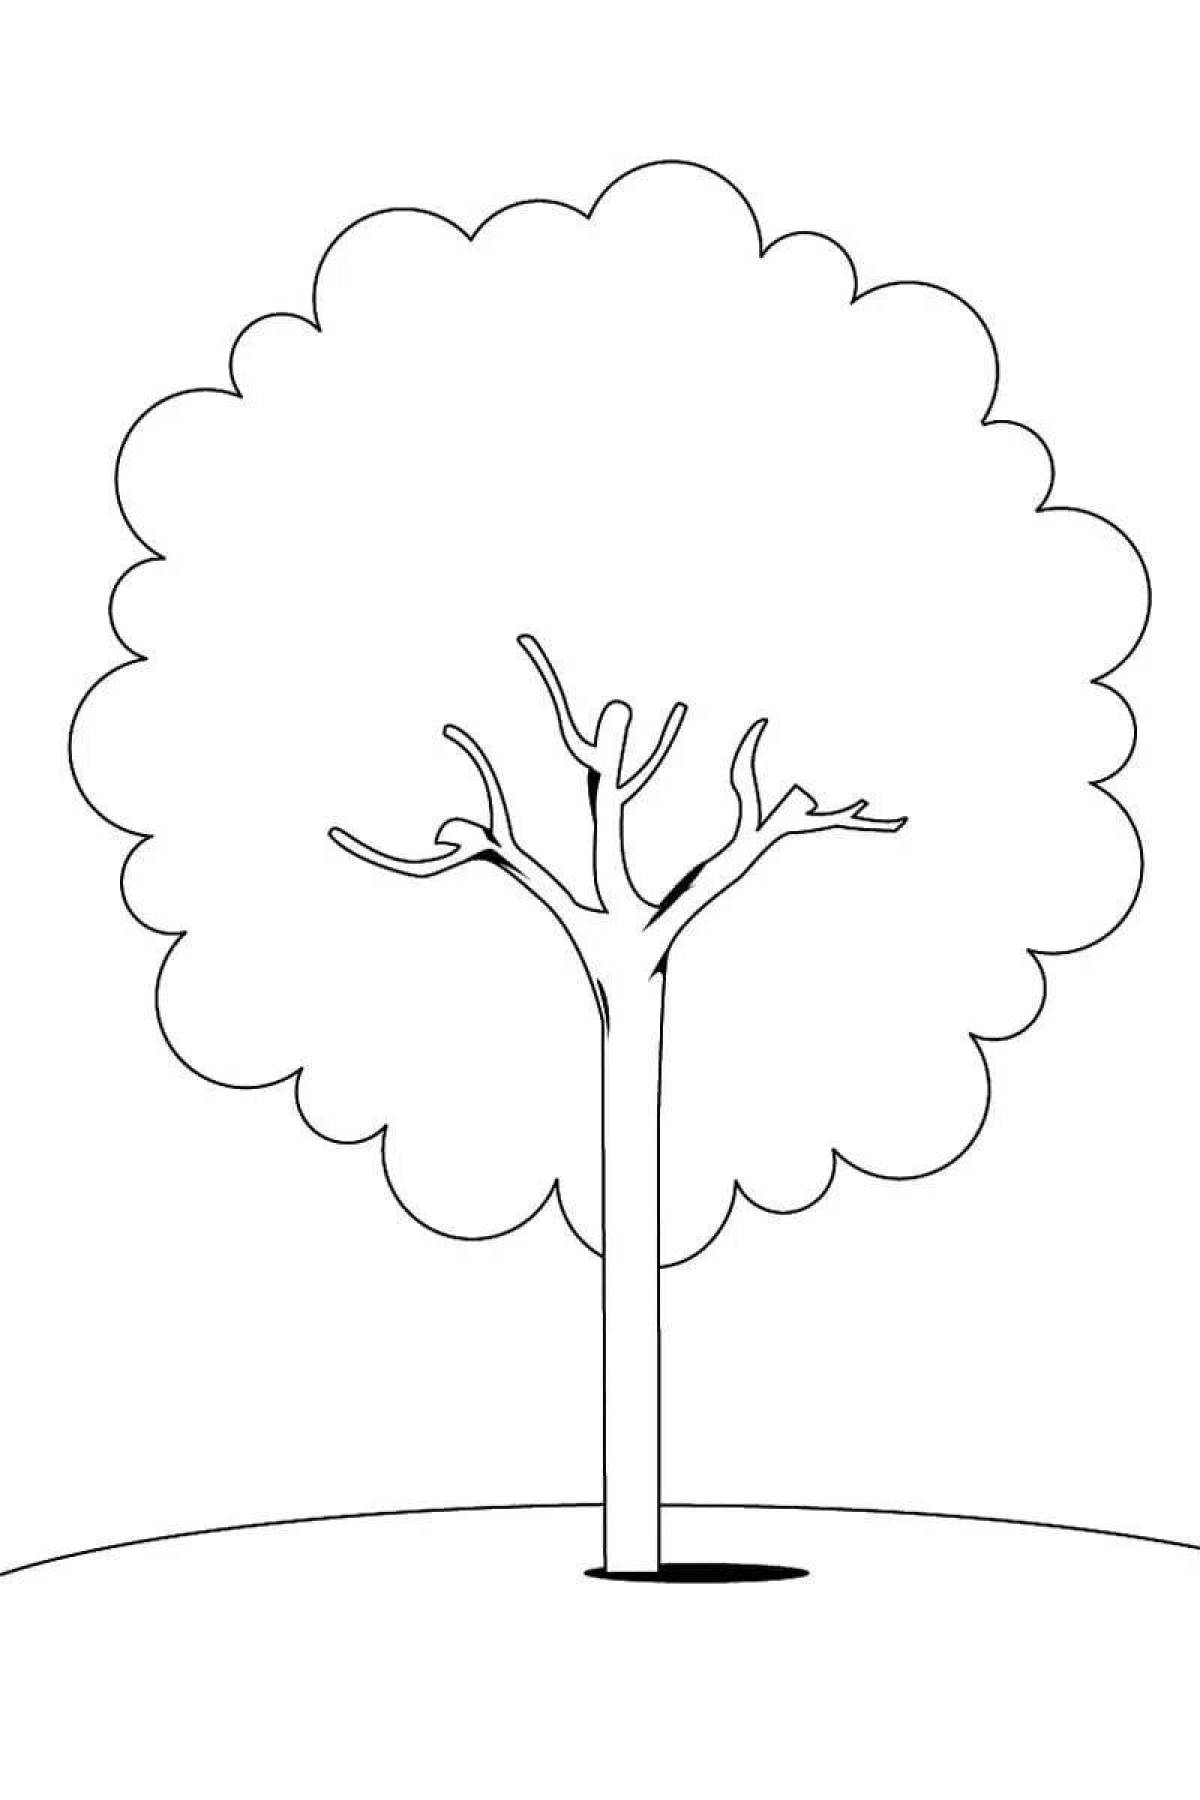 Colouring a fascinating tree silhouette